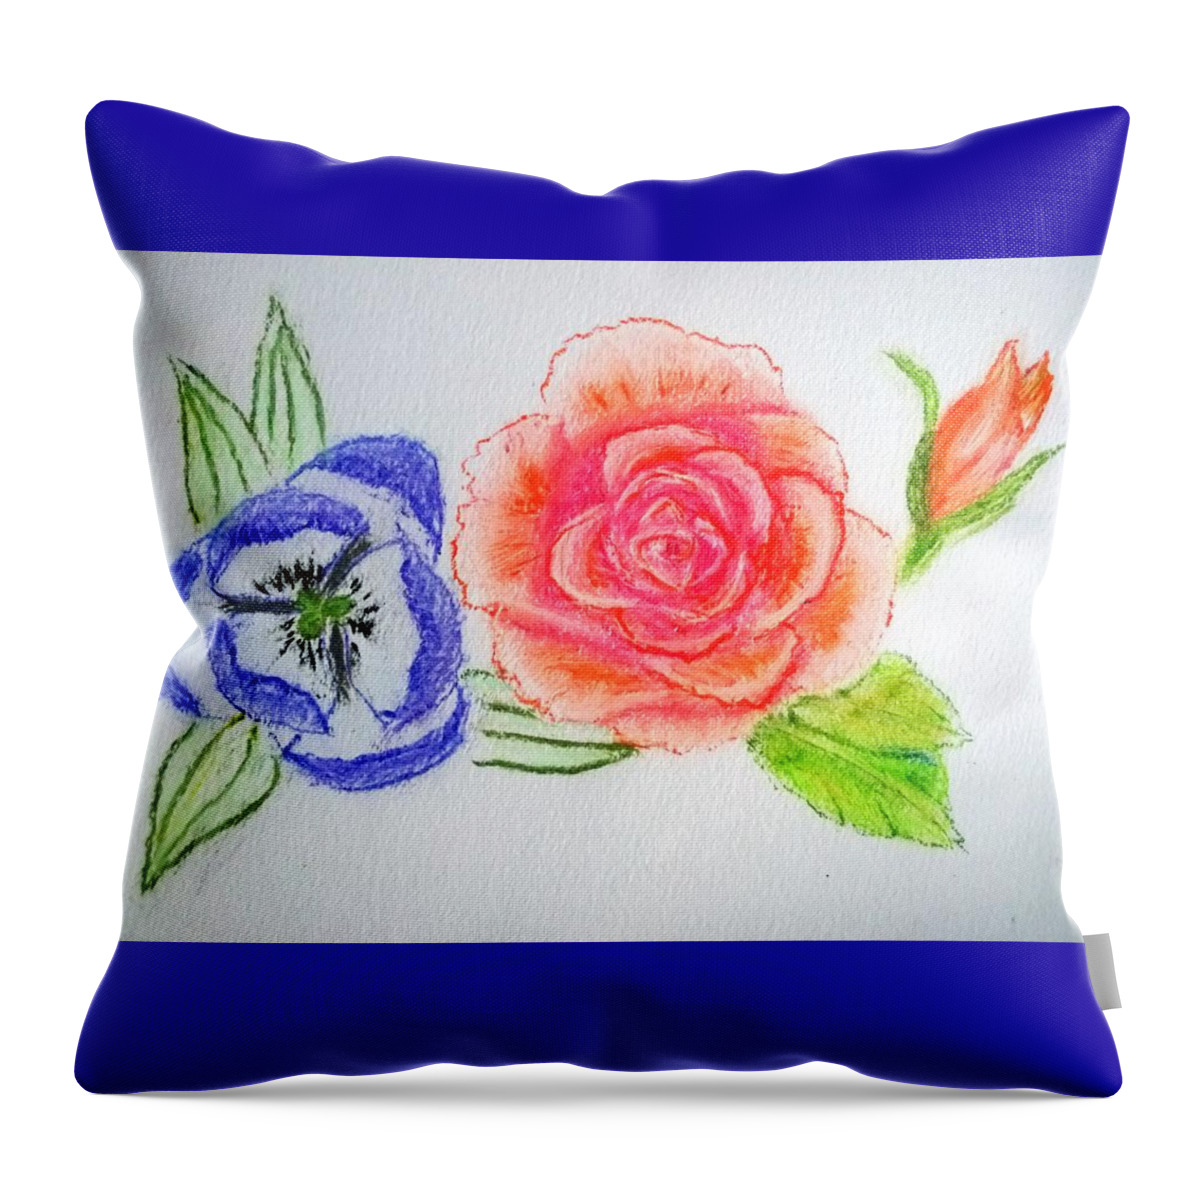 Sorrow Throw Pillow featuring the drawing Sorrow Orange Rose with Blue Tulip by Delynn Addams